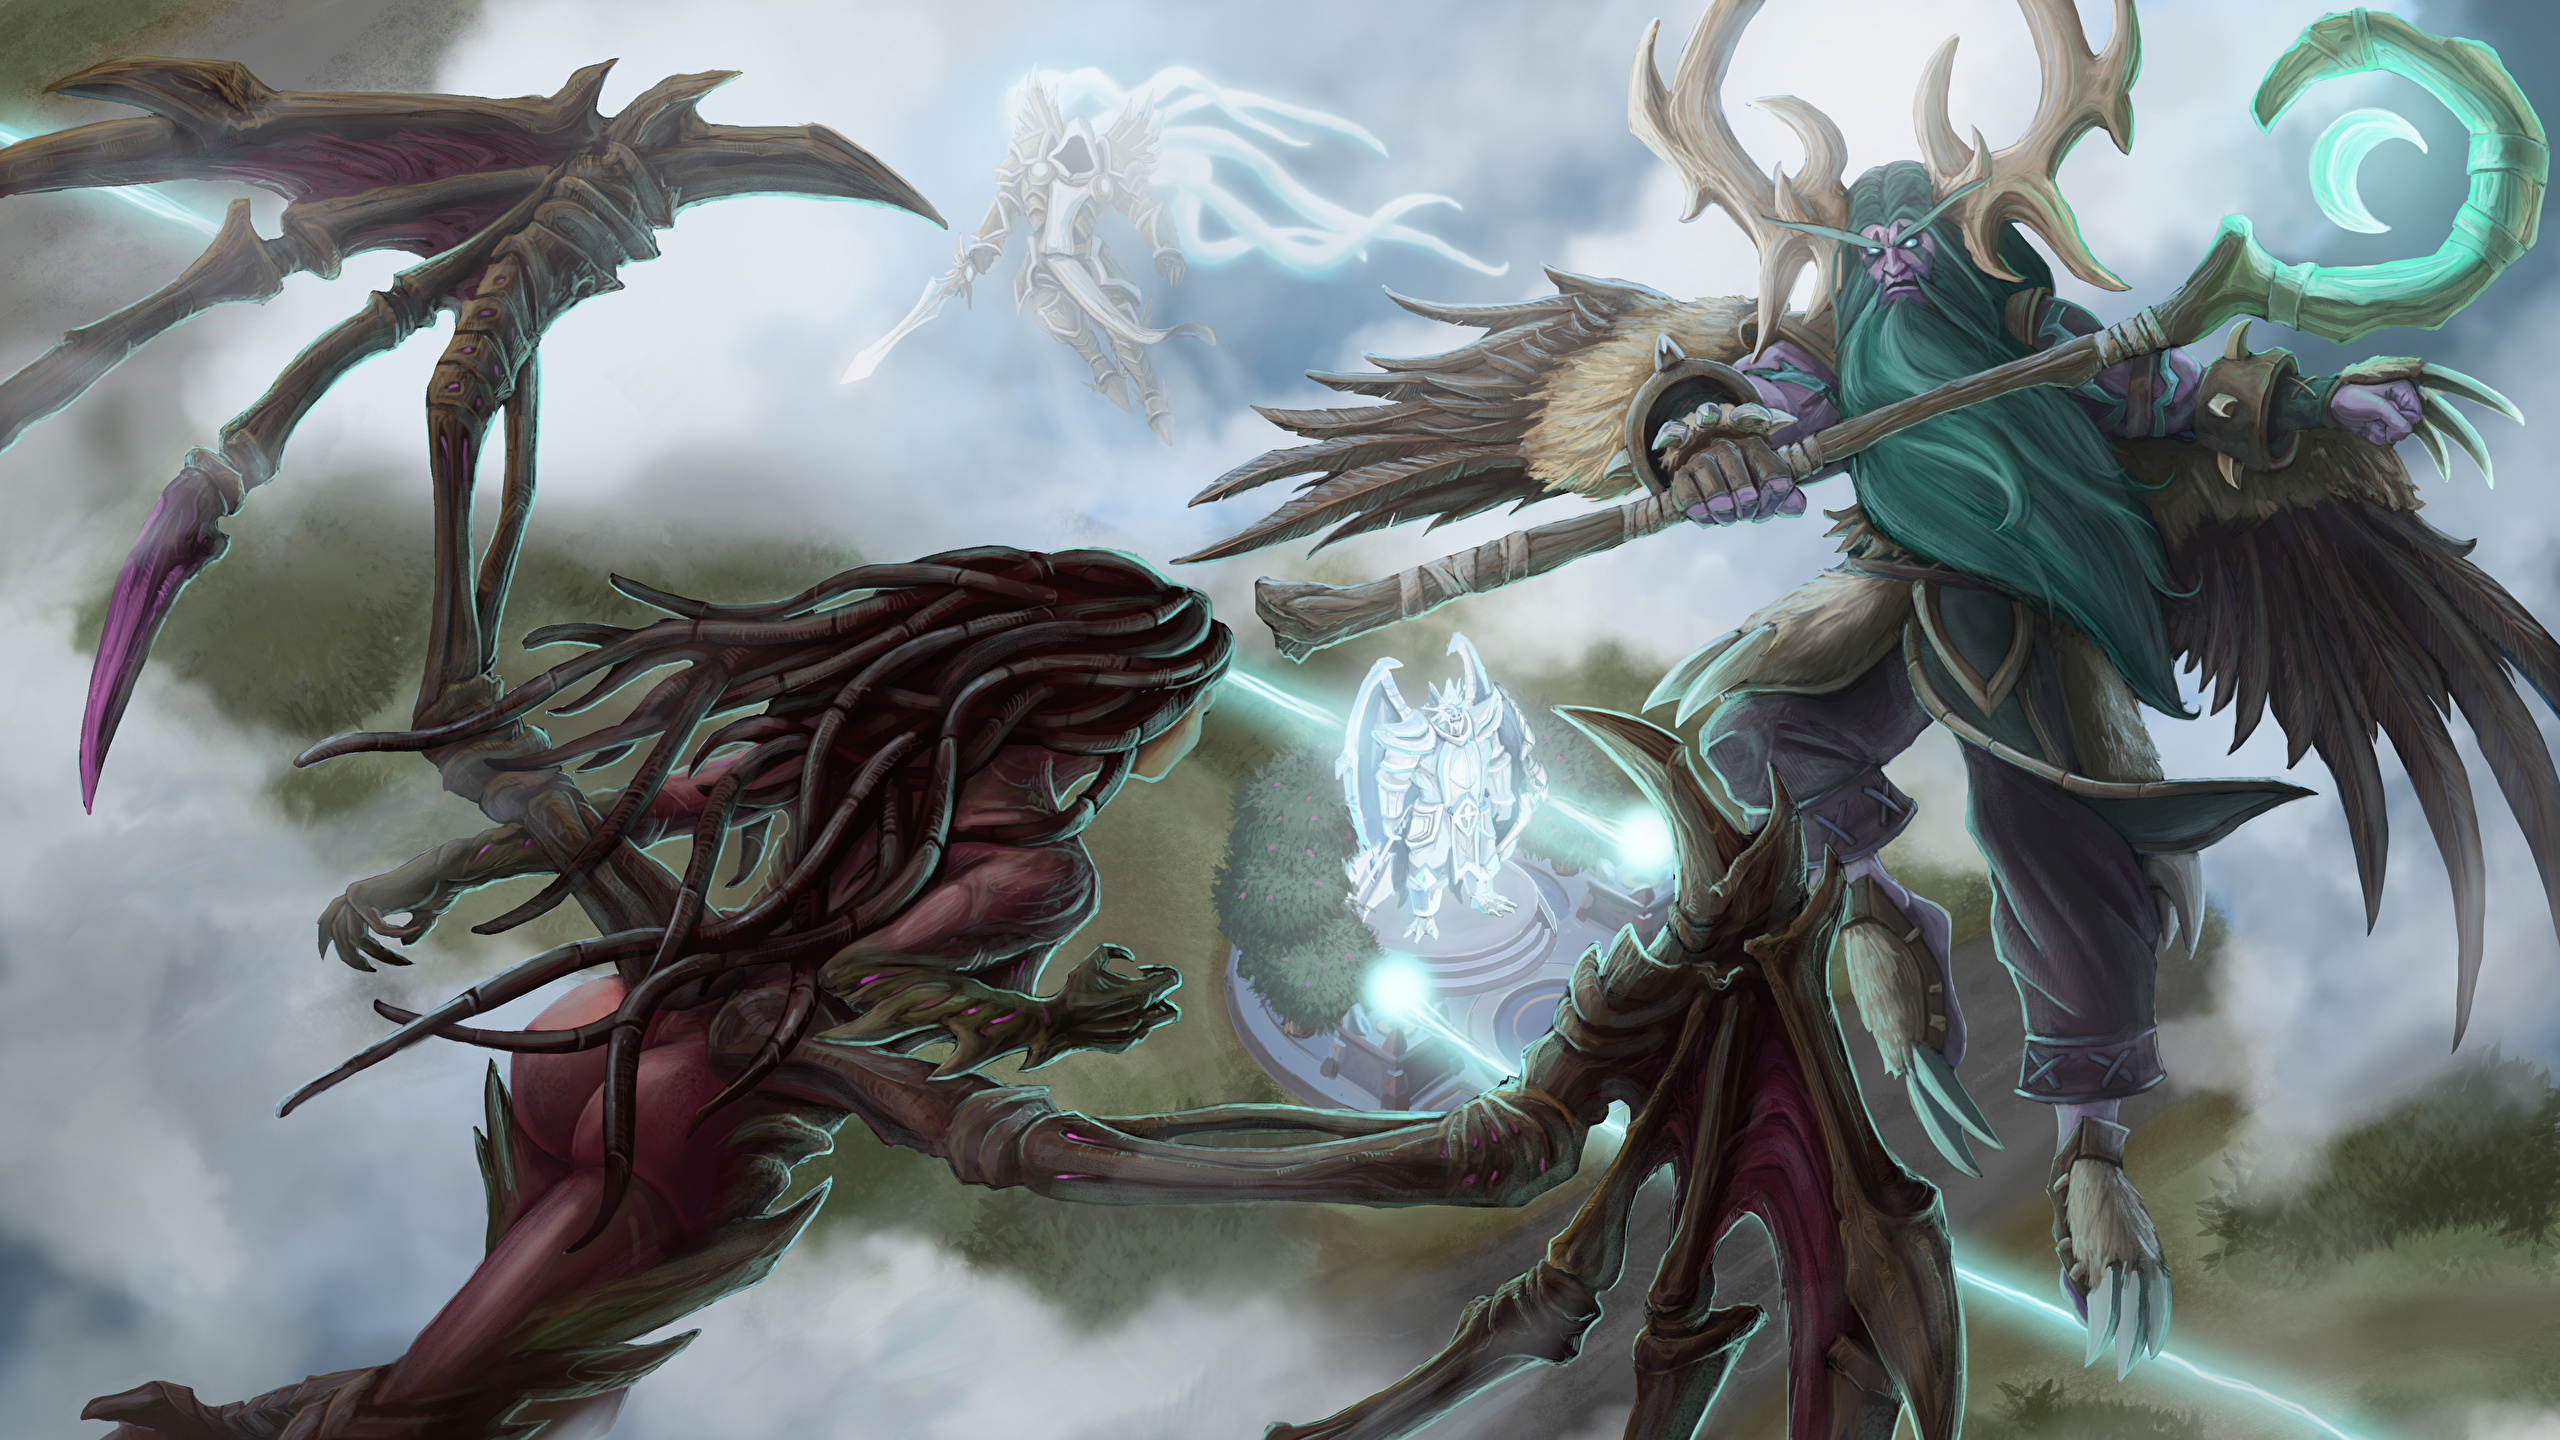 2560x1440、Heroes of the Storm、サラ・ケリガン、Archangel of Justice, Malfurion, Tyrael、翼、��ンピュータゲーム、ゲーム、ファンタジー、